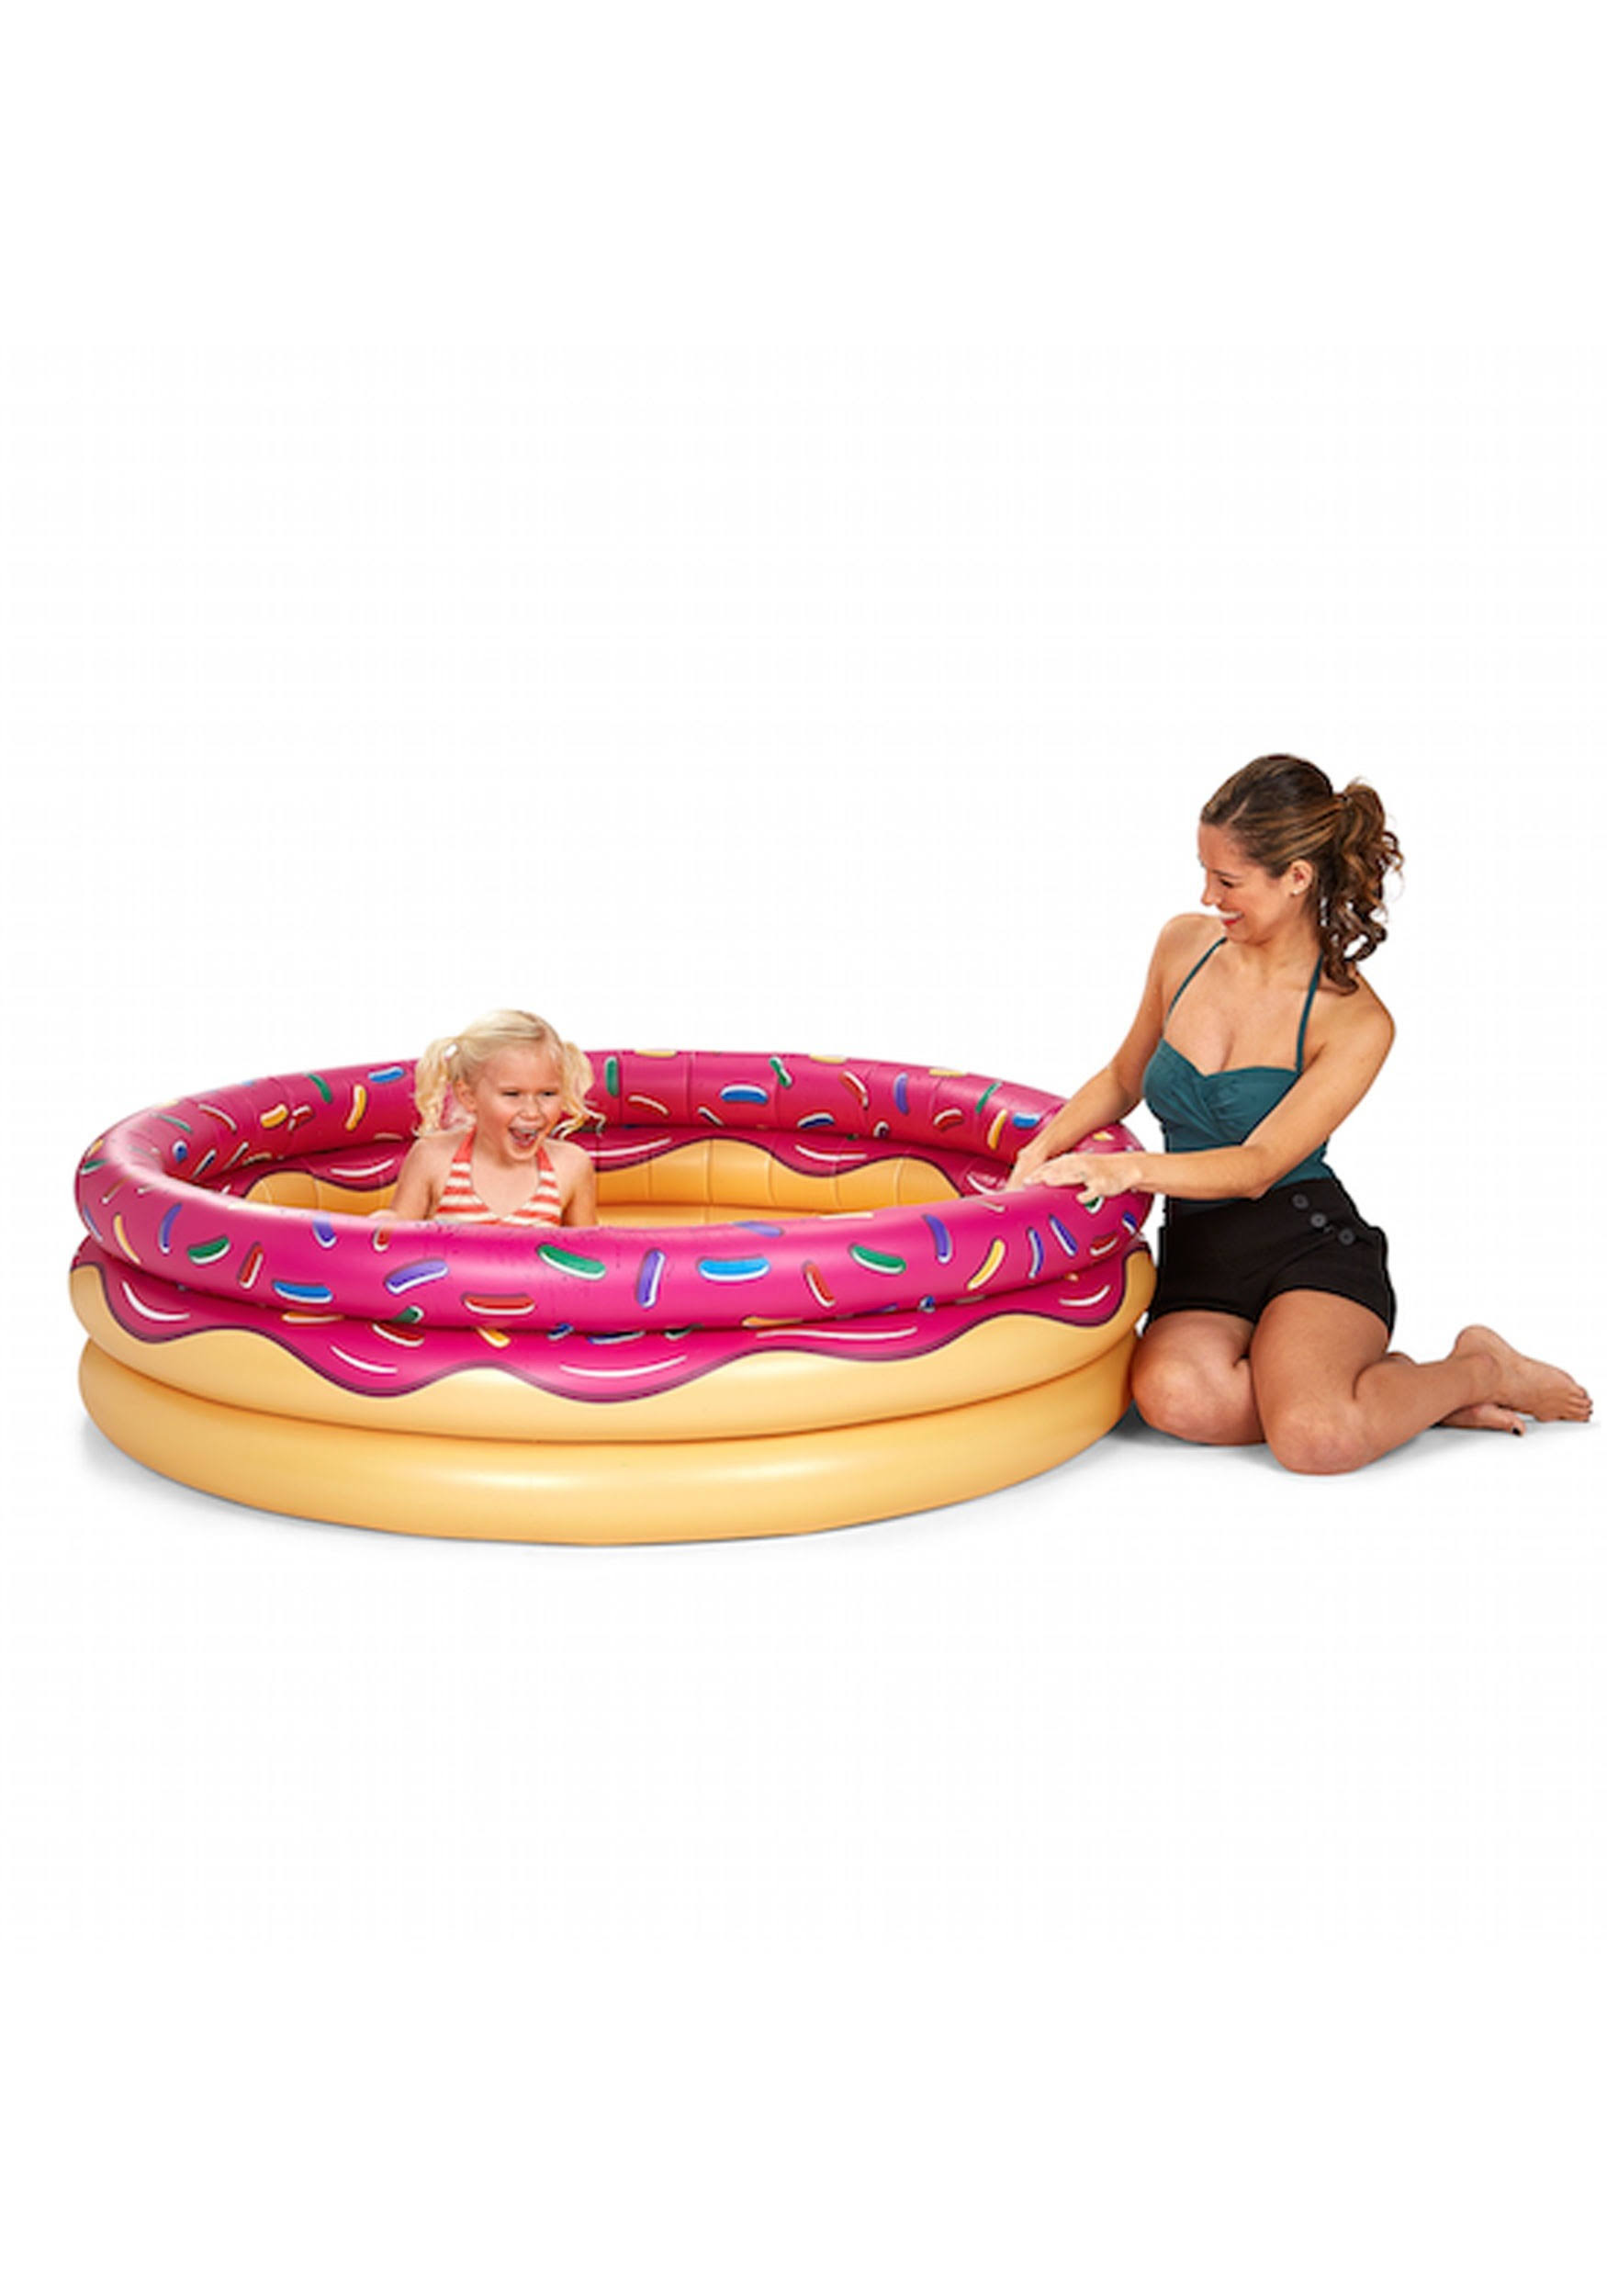 BigMouth Inc. Strawberry Donut Lil' Inflatable 5' Kiddie Pool, Durable